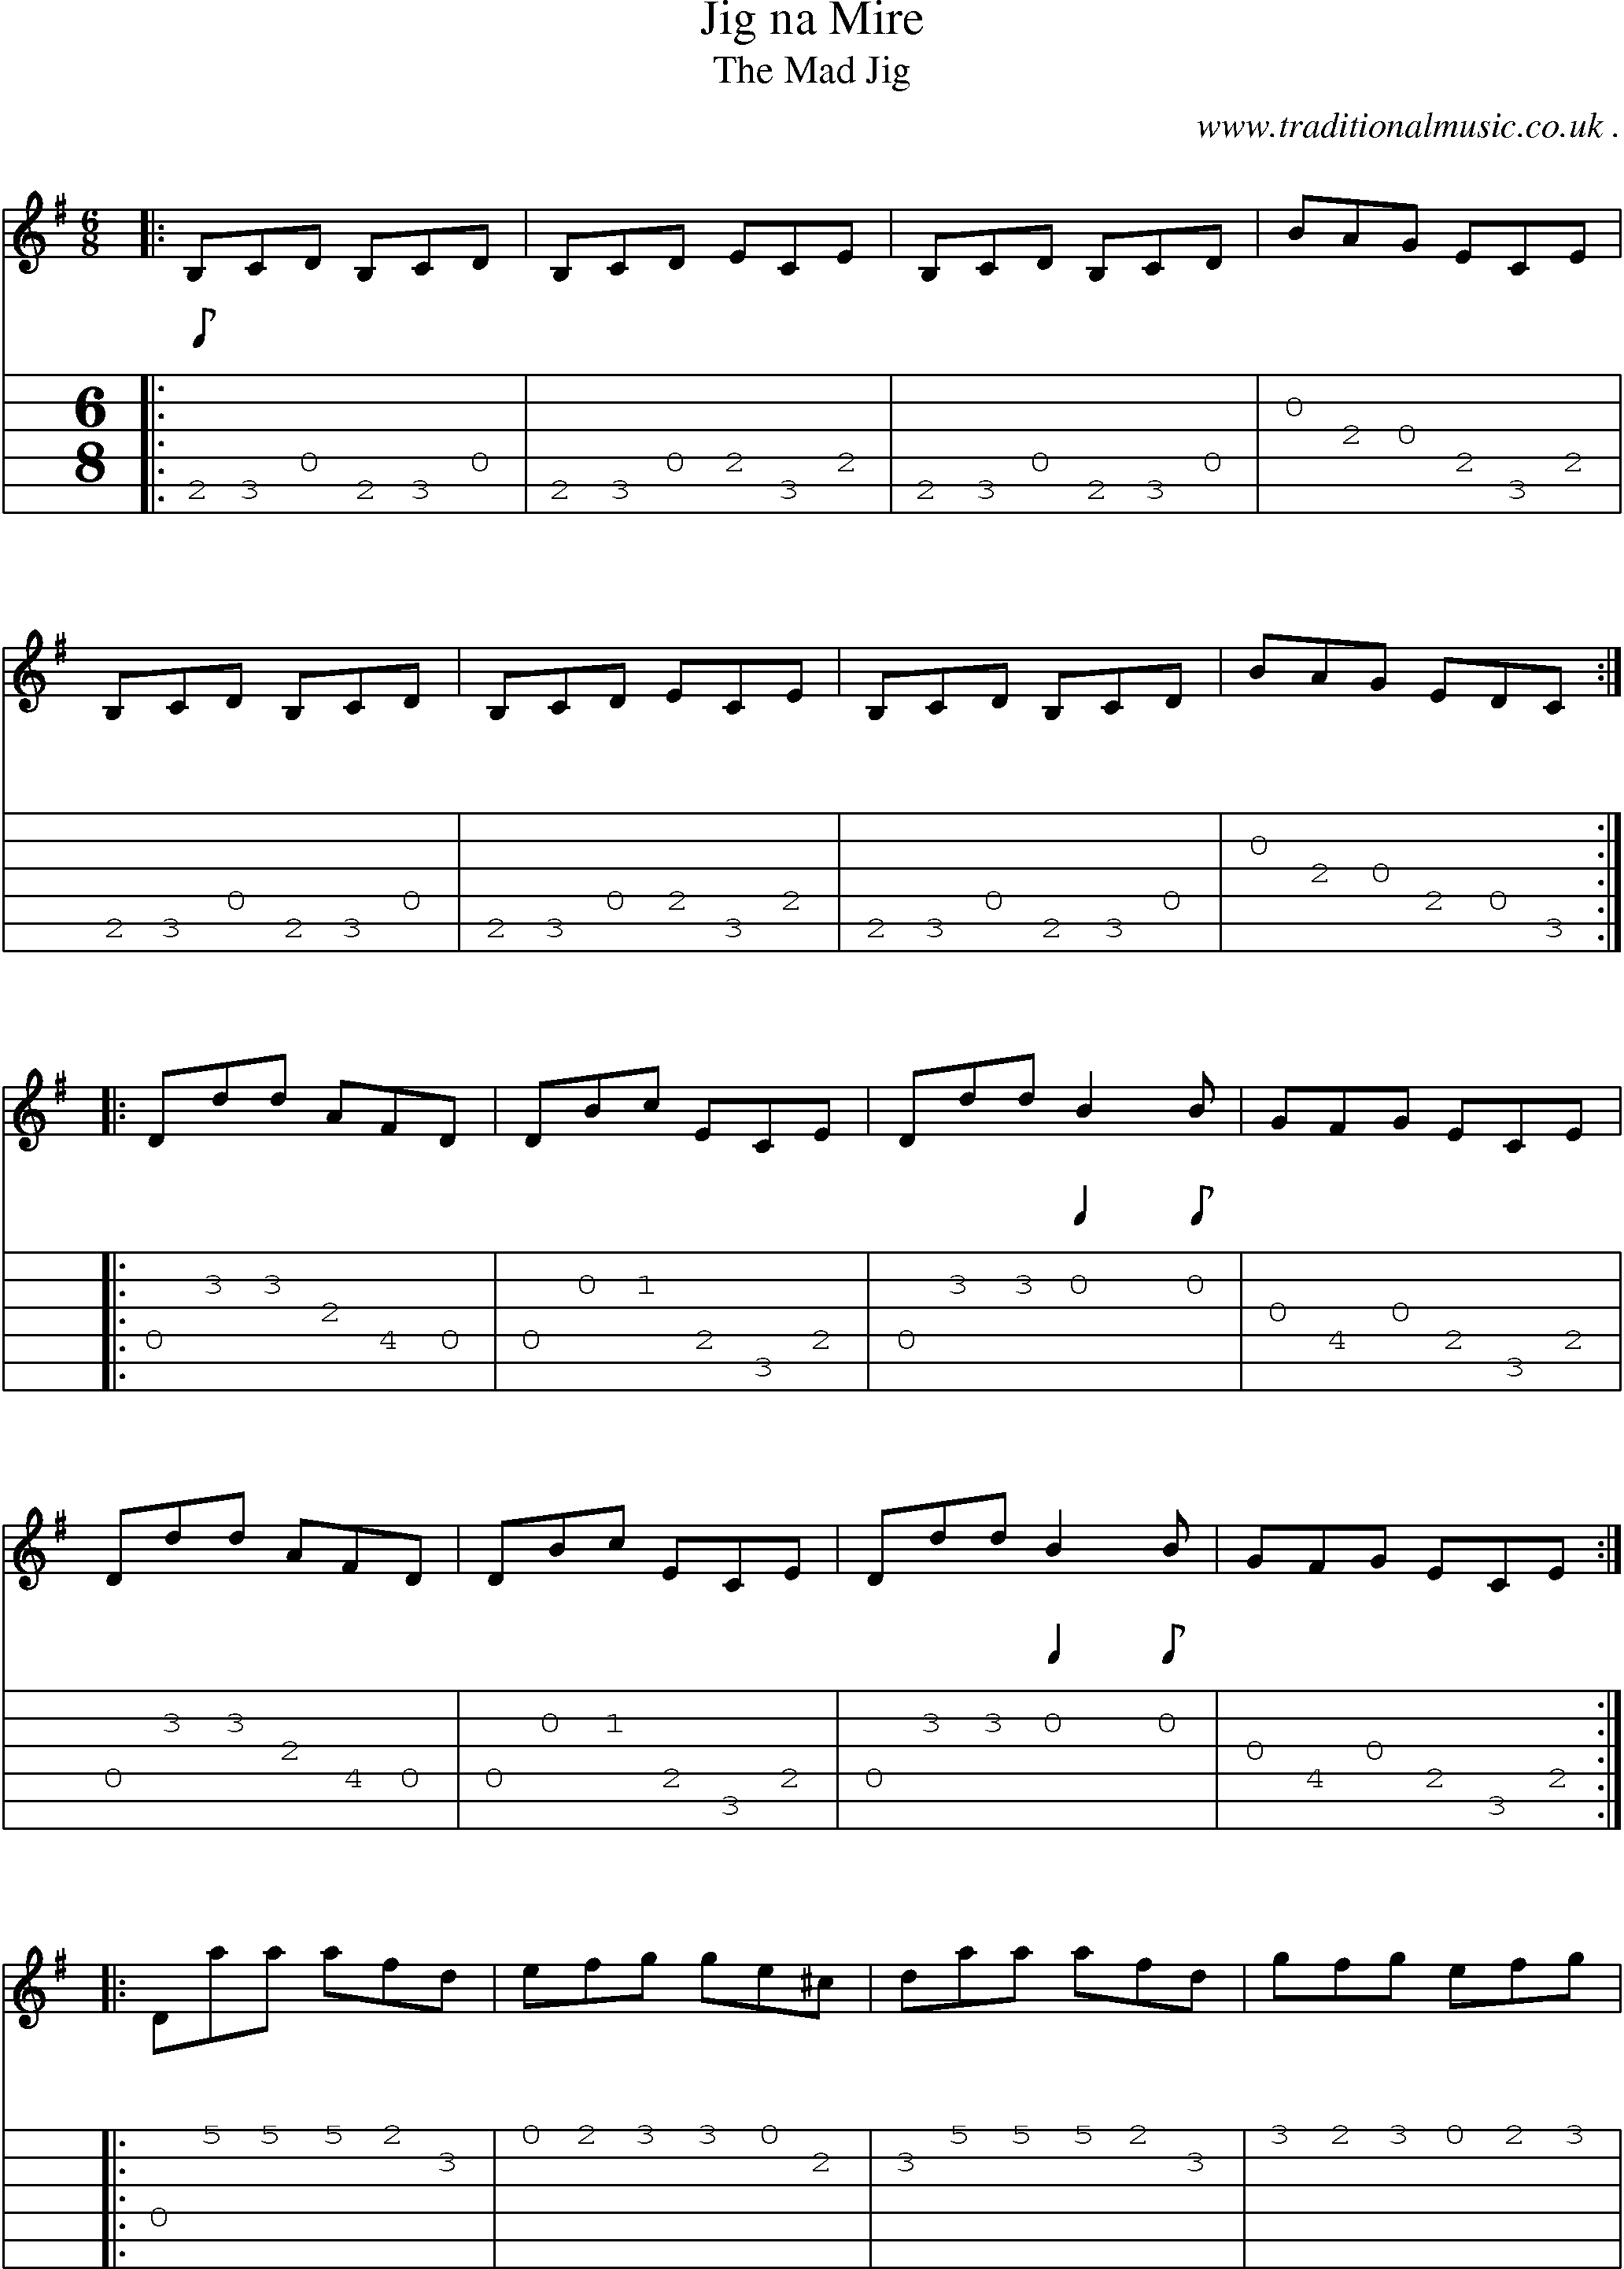 Sheet-Music and Guitar Tabs for Jig Na Mire